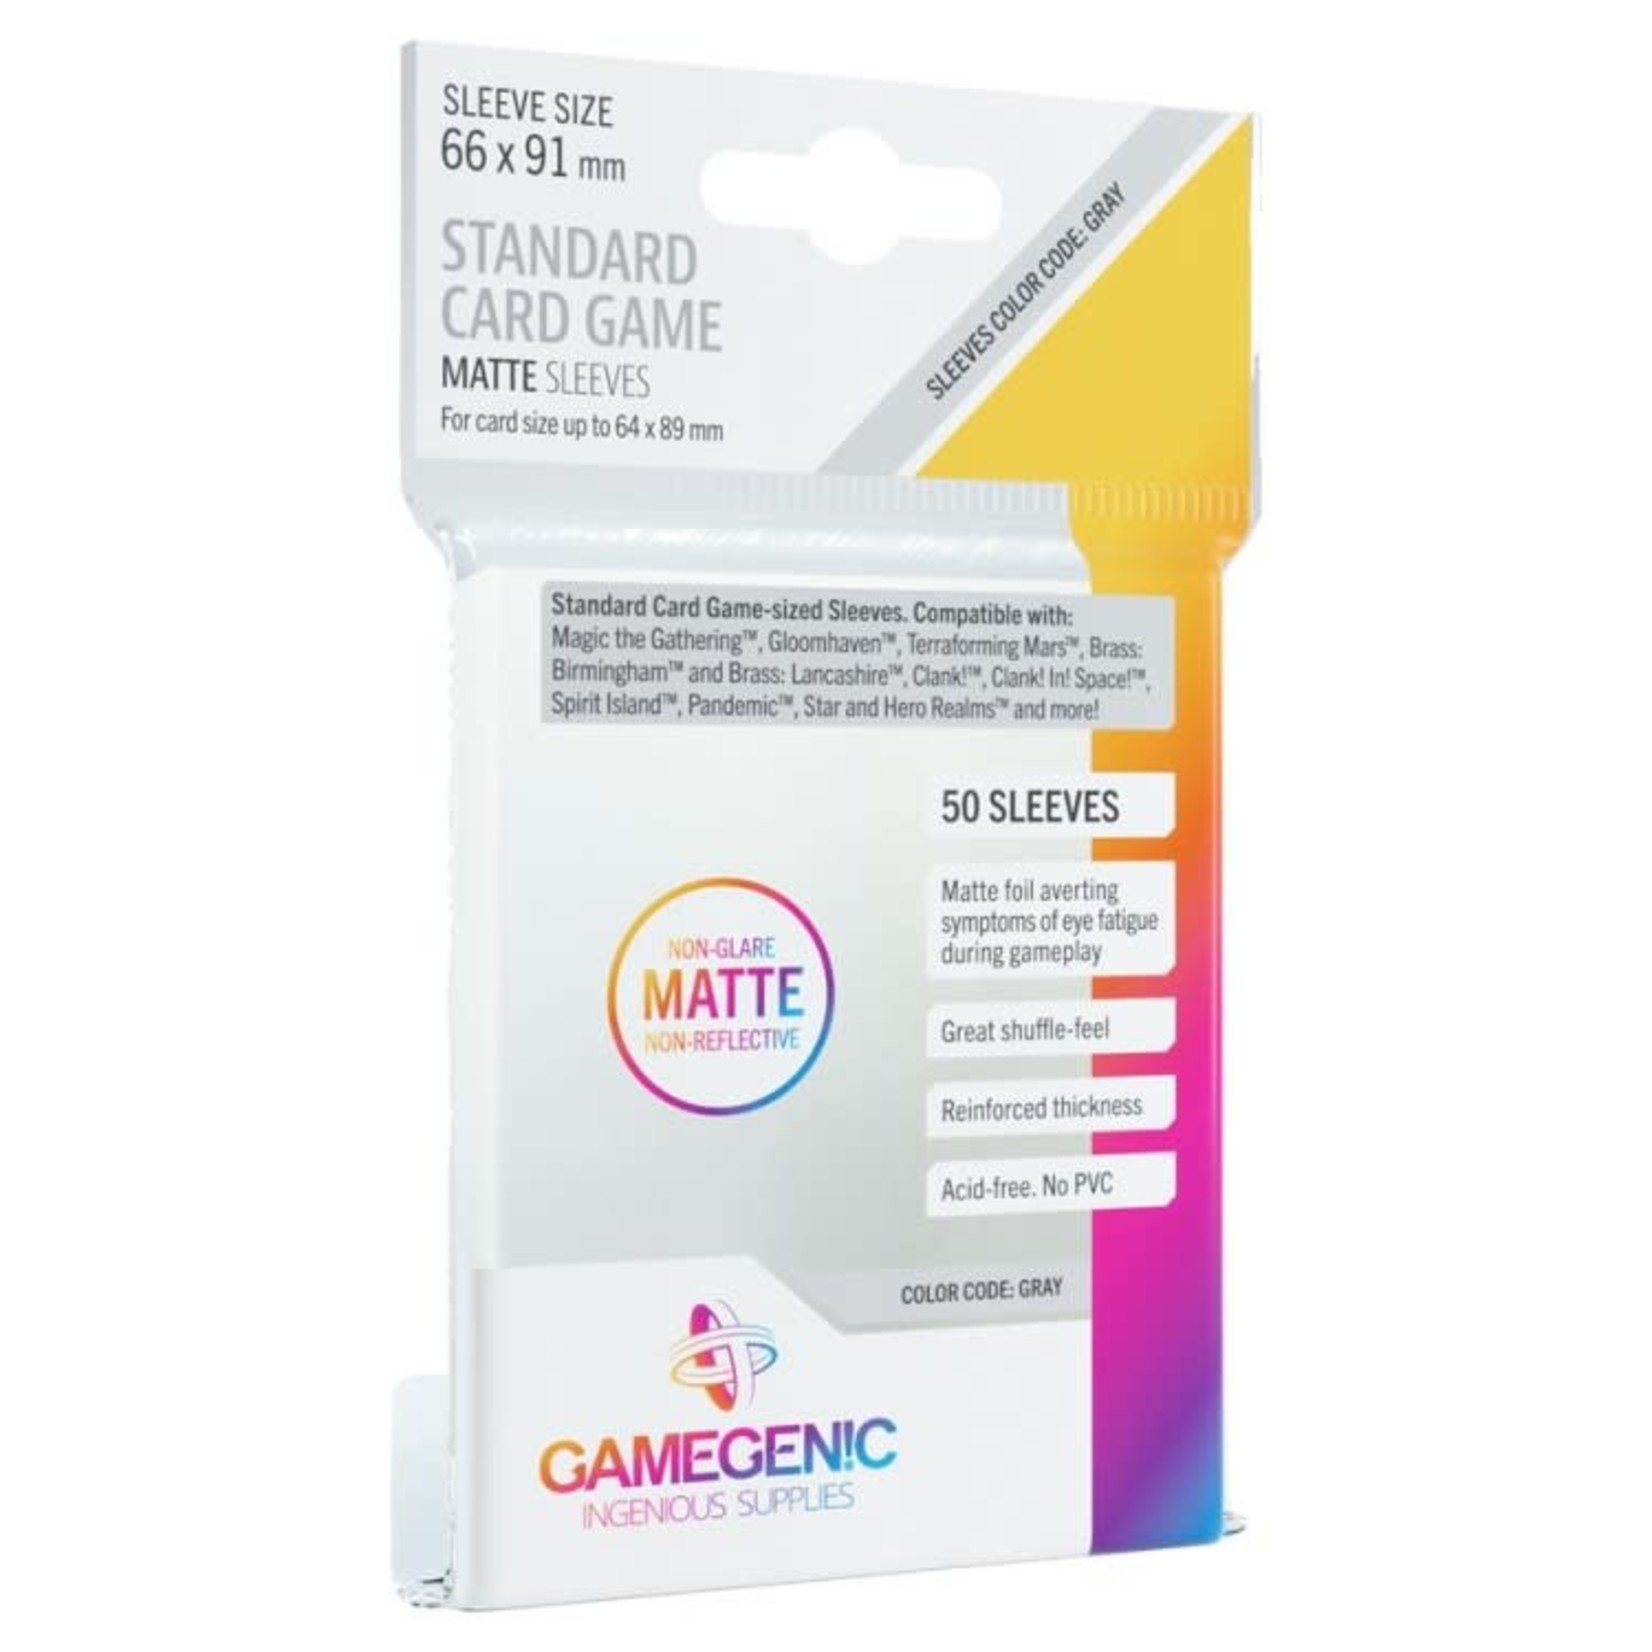 Gamegenic Sleeves: Standard American MATTE - 50 count (59x91mm)